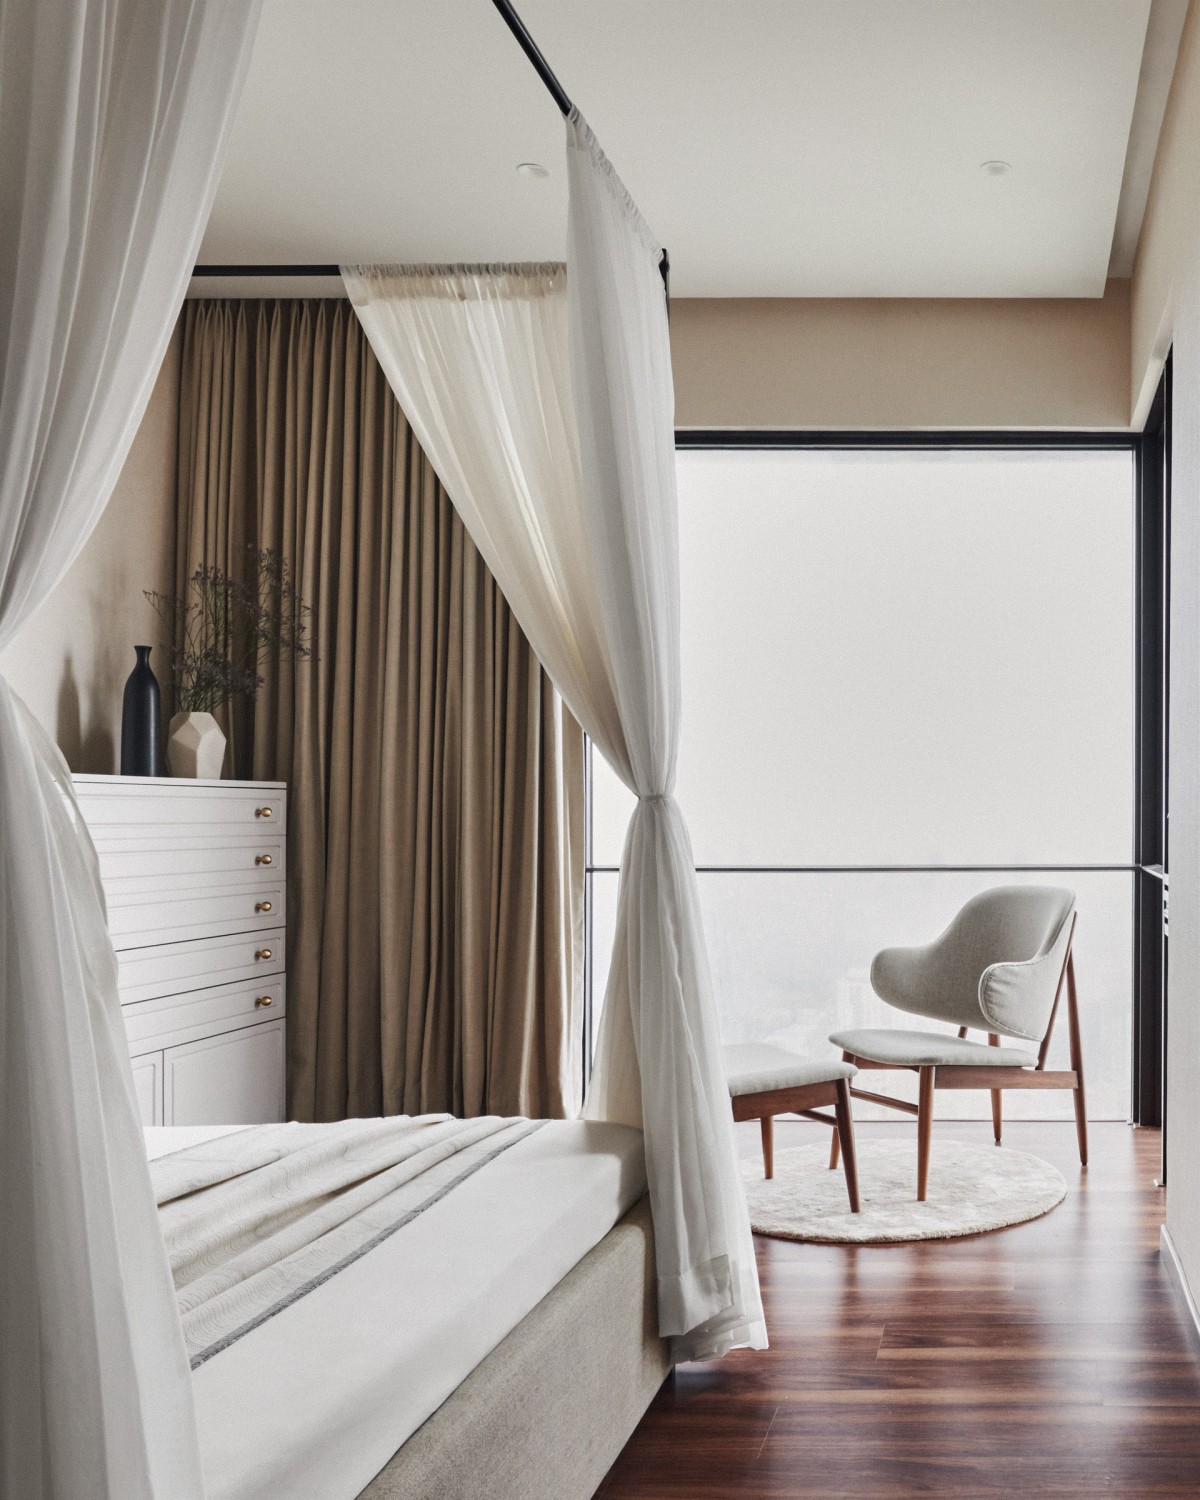 Bedroom 2 of Homes in a Skyscraper by Aashni Kumar Architects